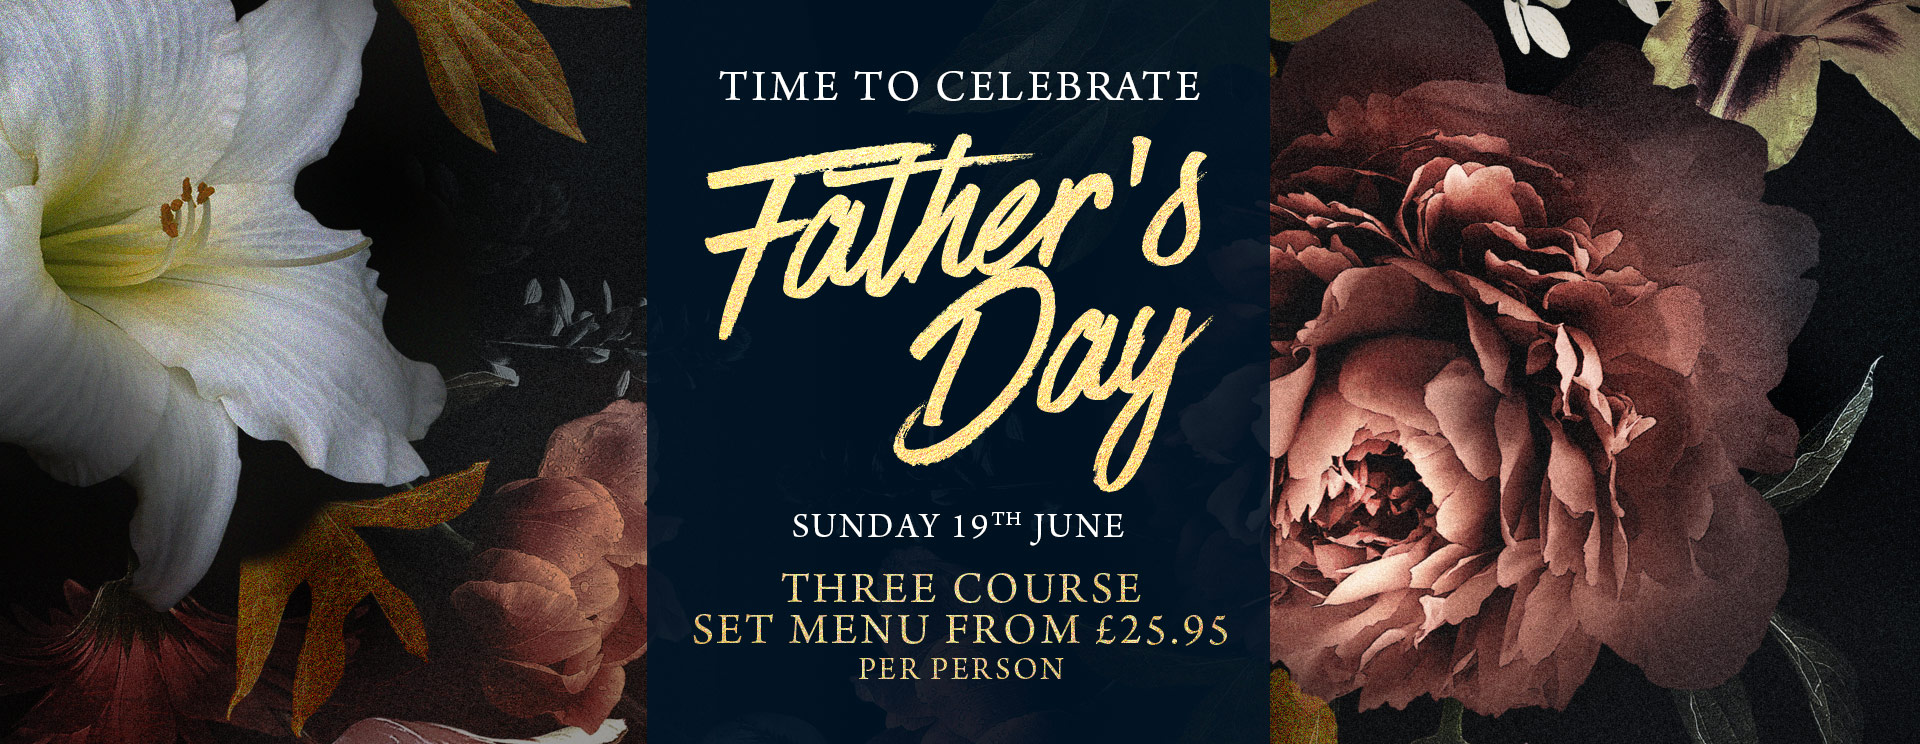 Fathers Day at The Cowper Arms